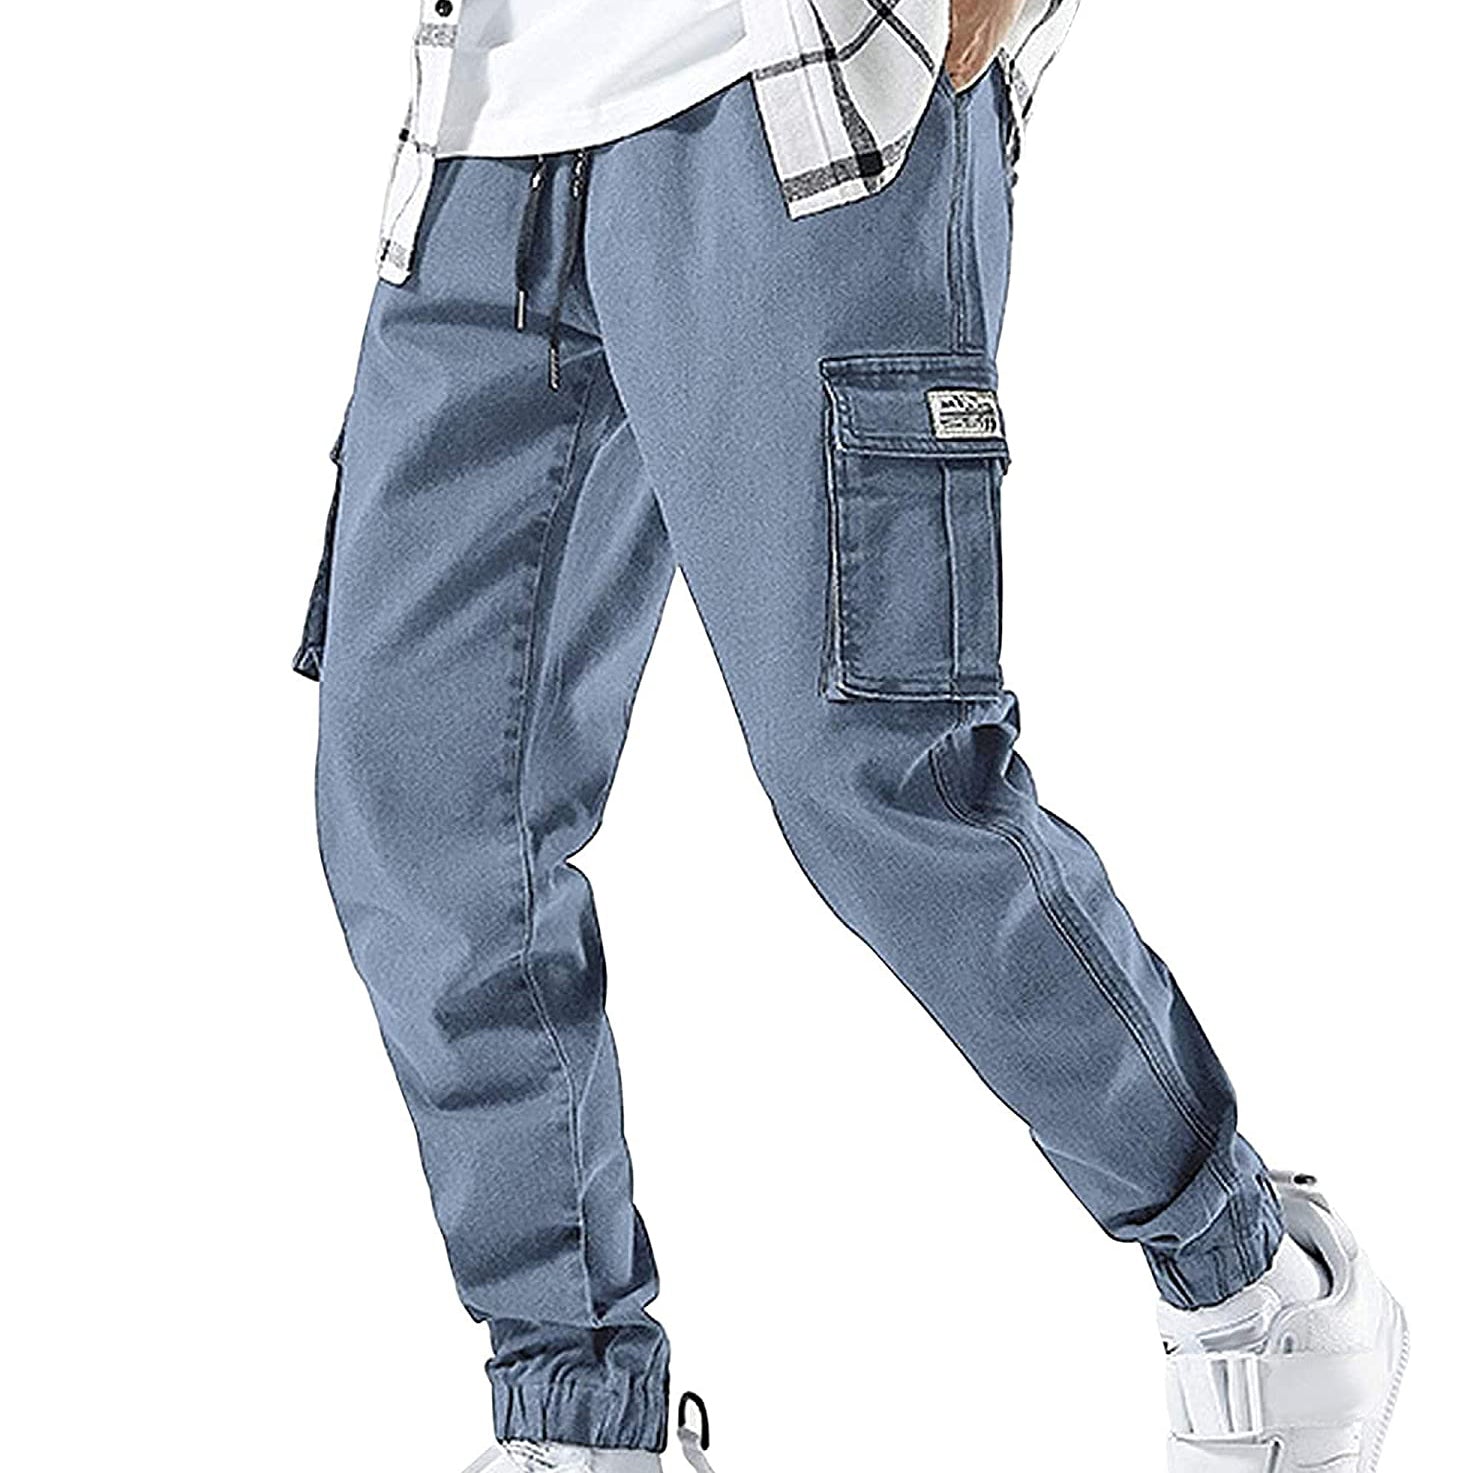 Streetwear Hip Hop Cargo Joggers Pants for Men Denim Overalls Sports Harness Feet Harlan Casual Trousers